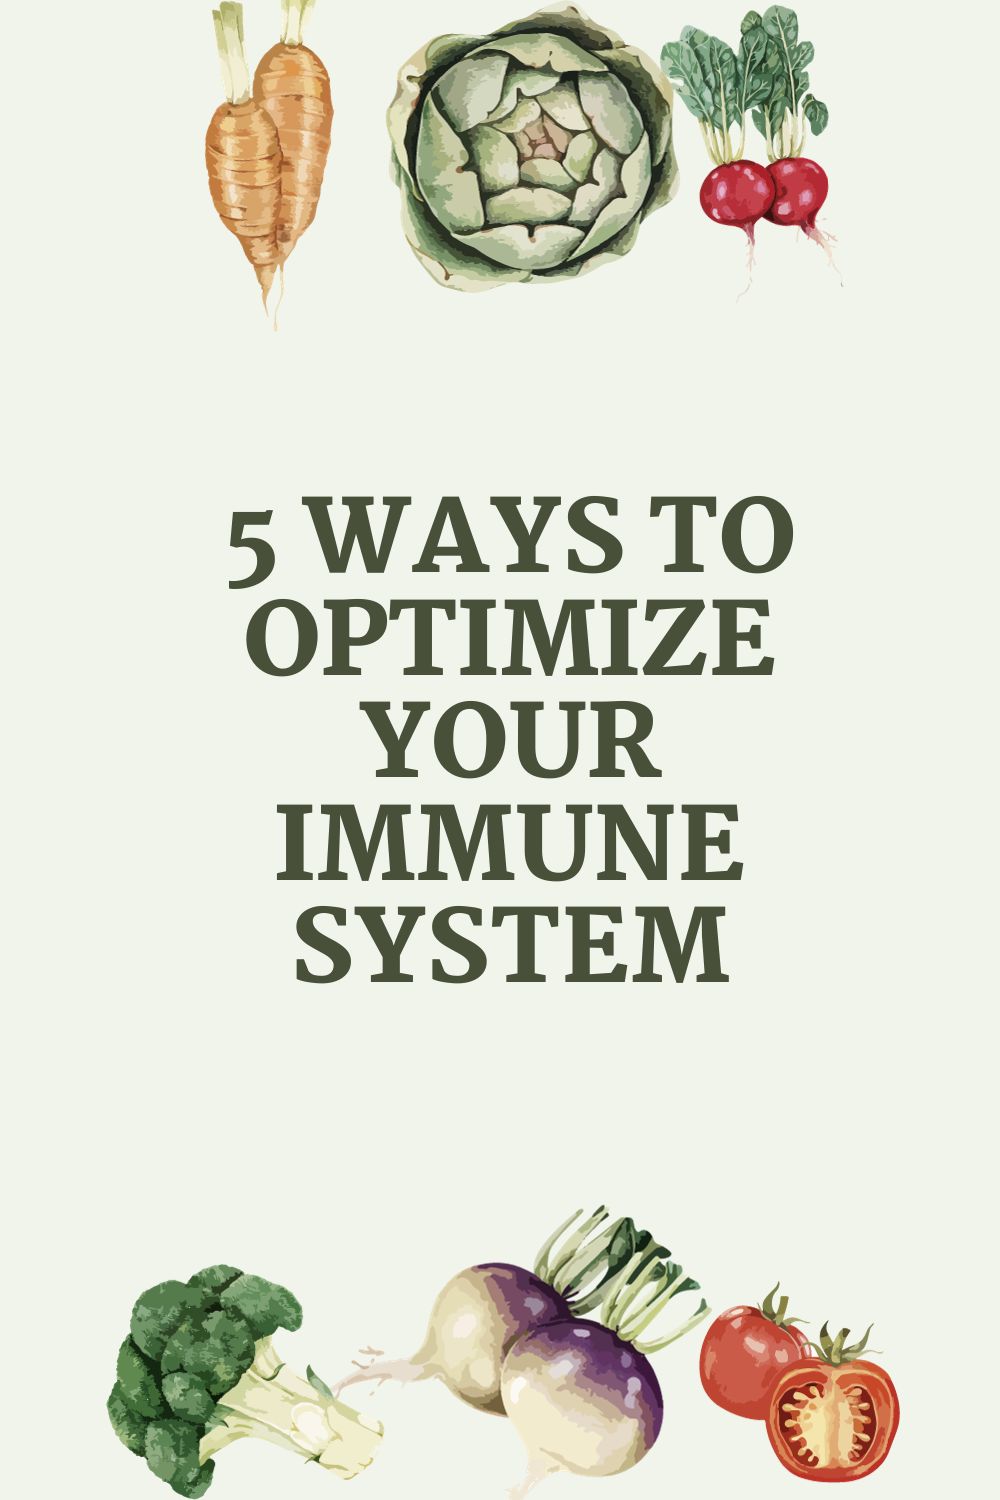 5 Ways to Optimize Your Immune System